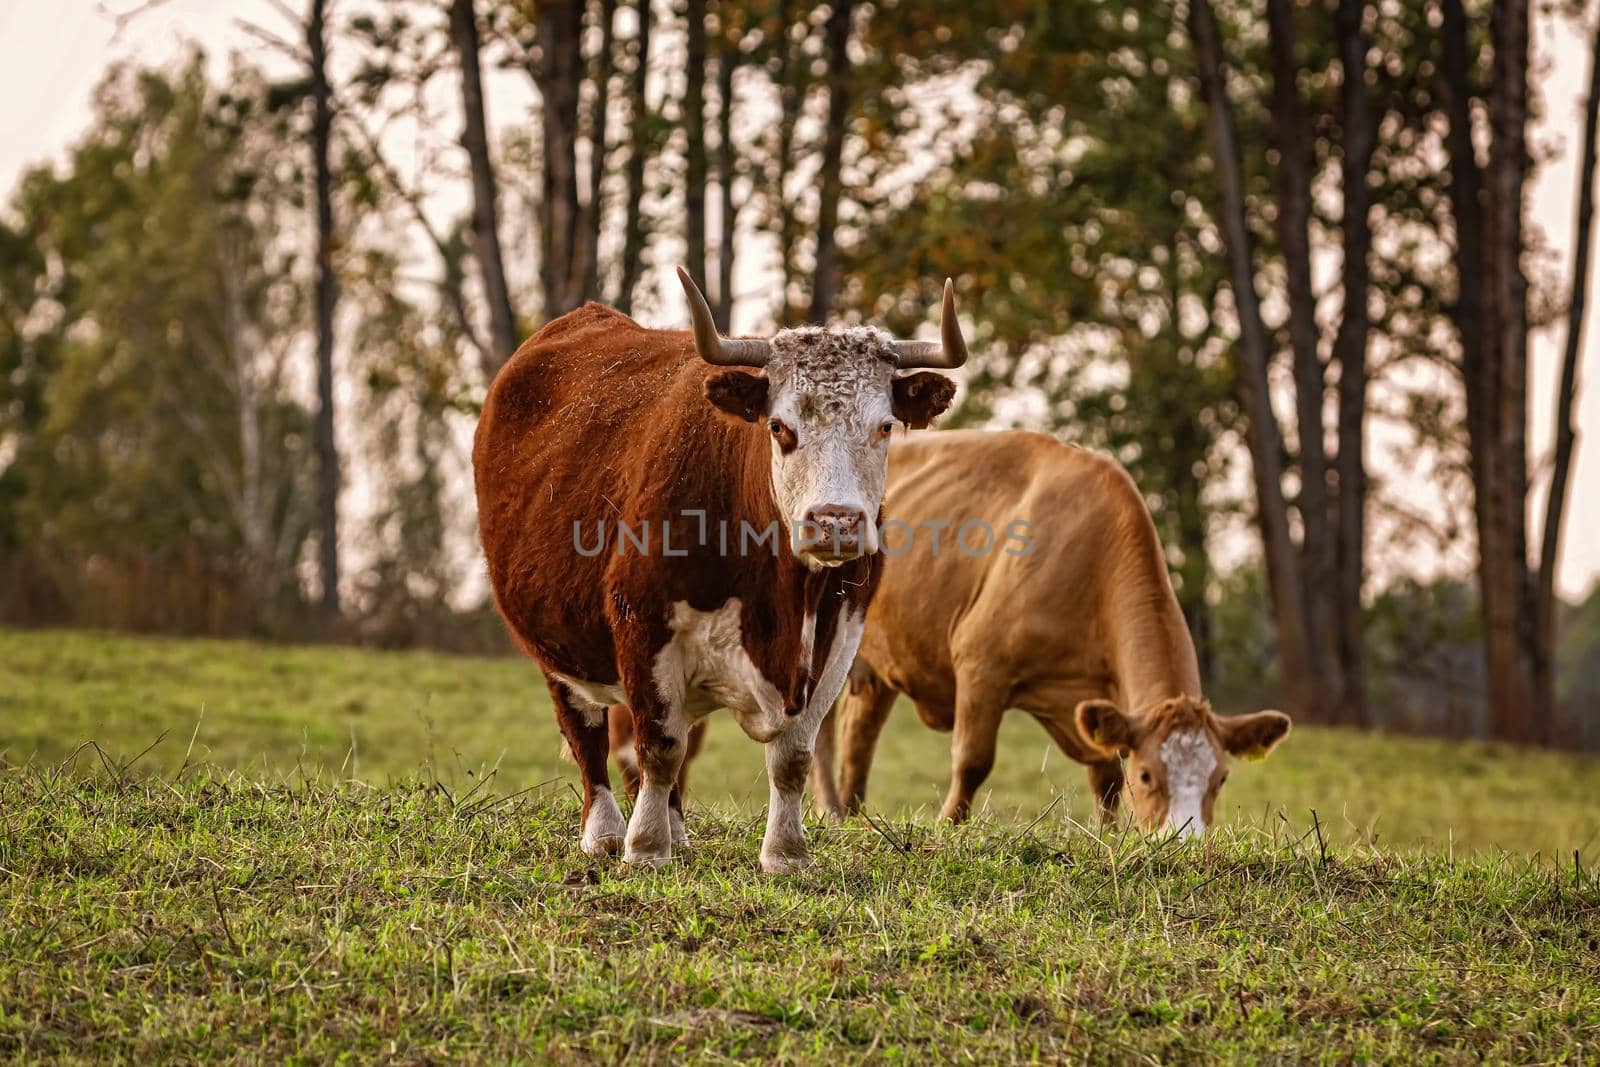 Cows on the pasture in rural area